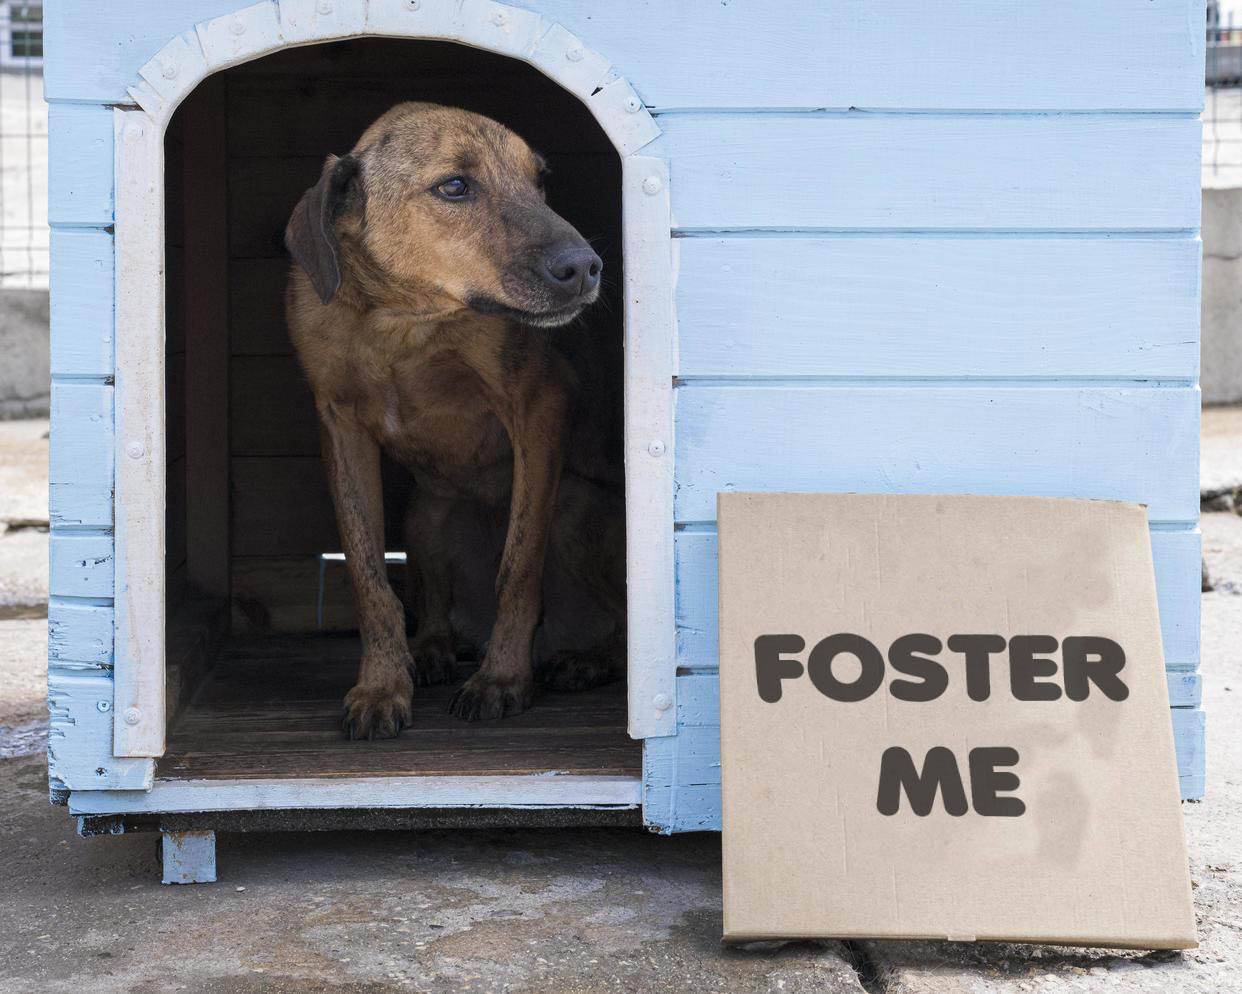 Foster Me